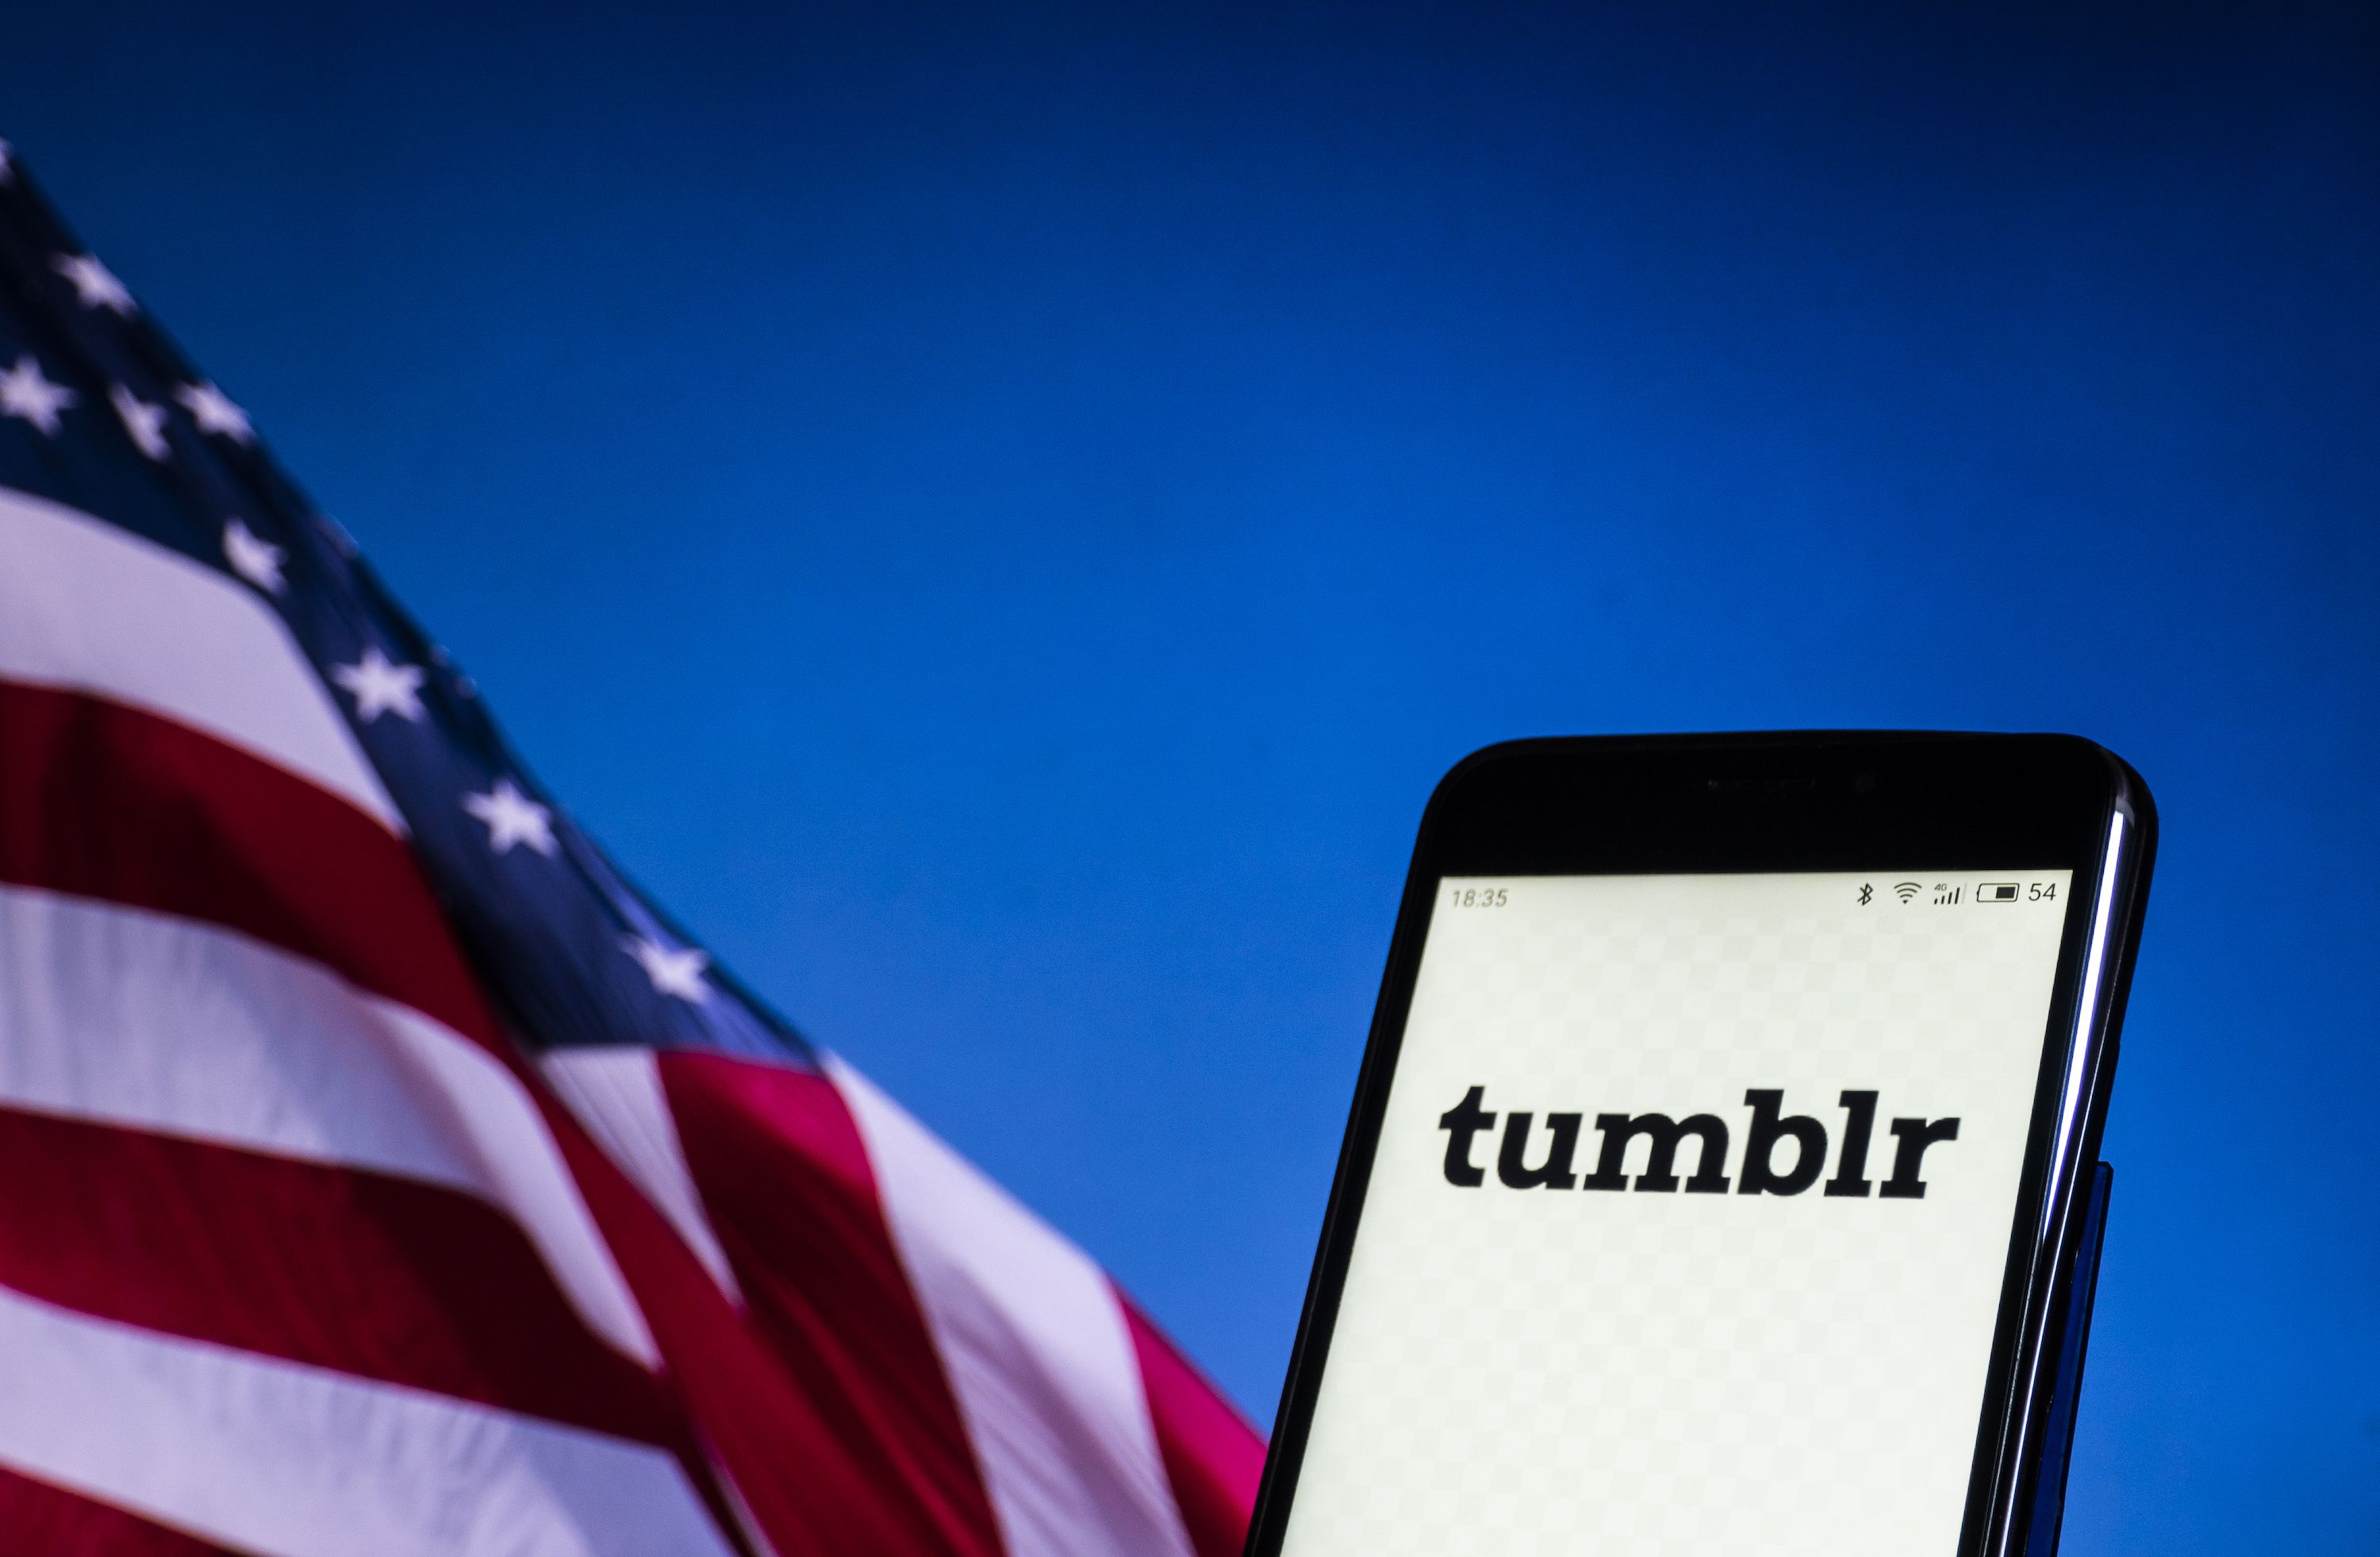 All Good Porn - Tumblr Is Banning Porn, So I Guess Tumblr Is Dead Now ...